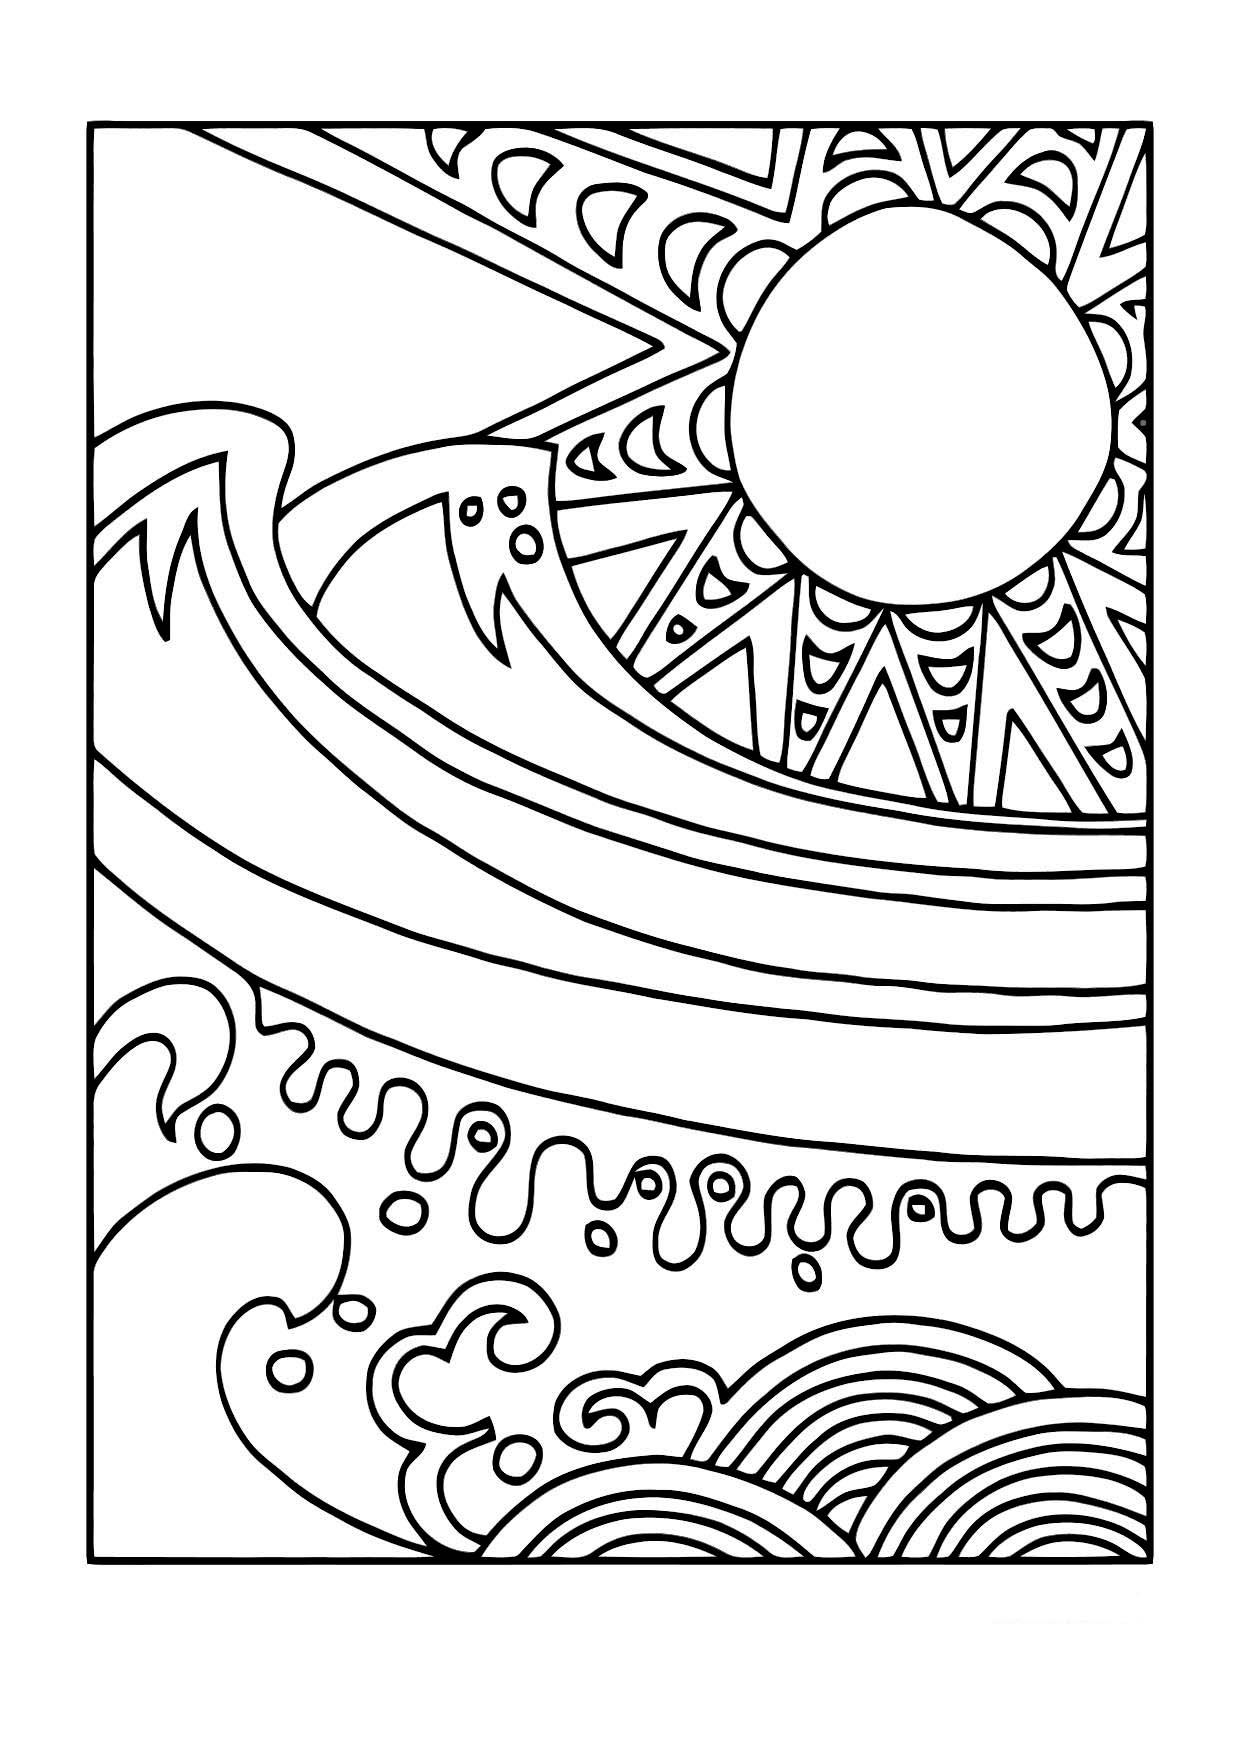 Coloring page sun and sea